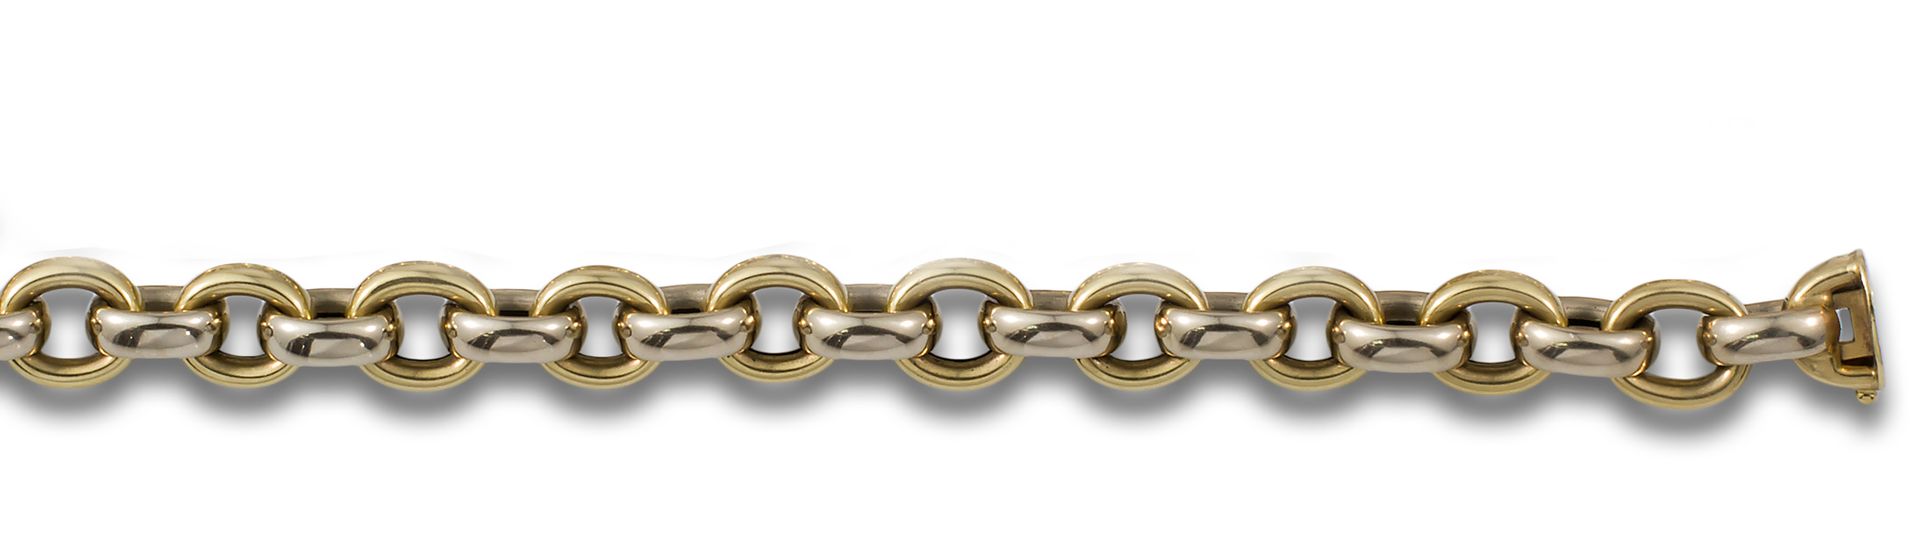 18kt white and yellow gold bracelet made of chained links. Weight: 26 gr. Armban&hellip;